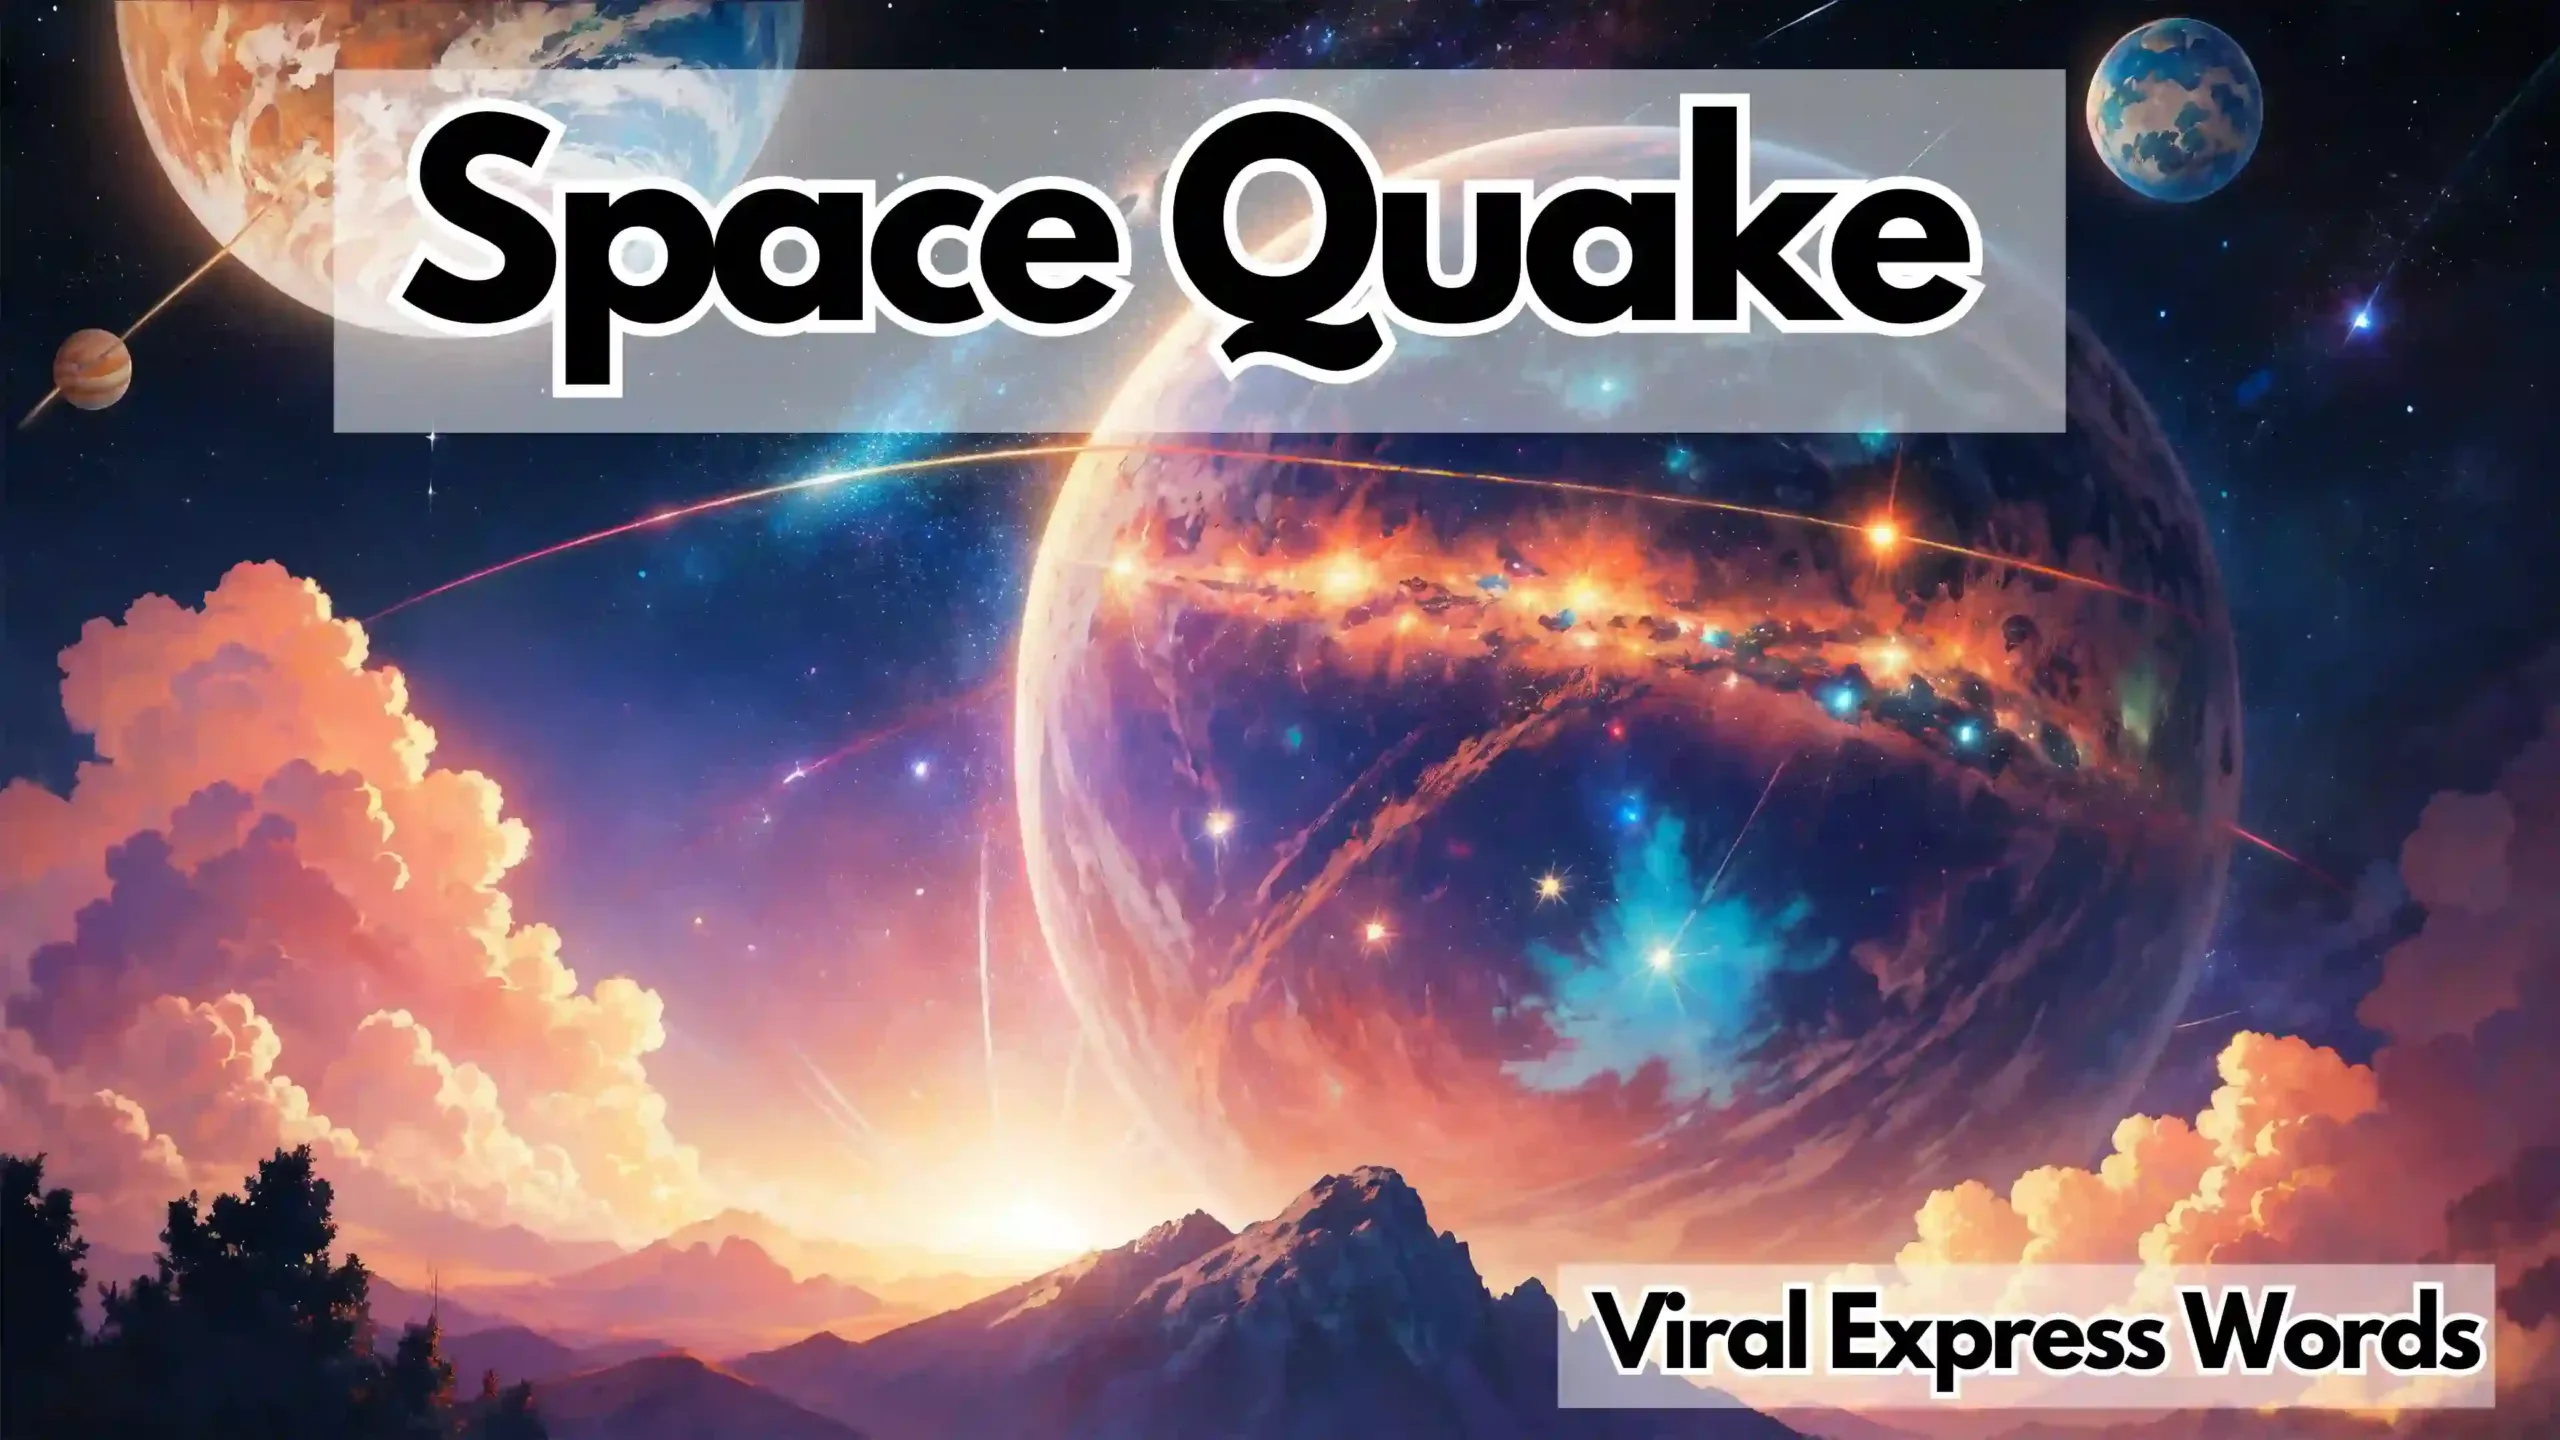 spacequakes-:-mysteries-of-cosmic-tremors-unveiled